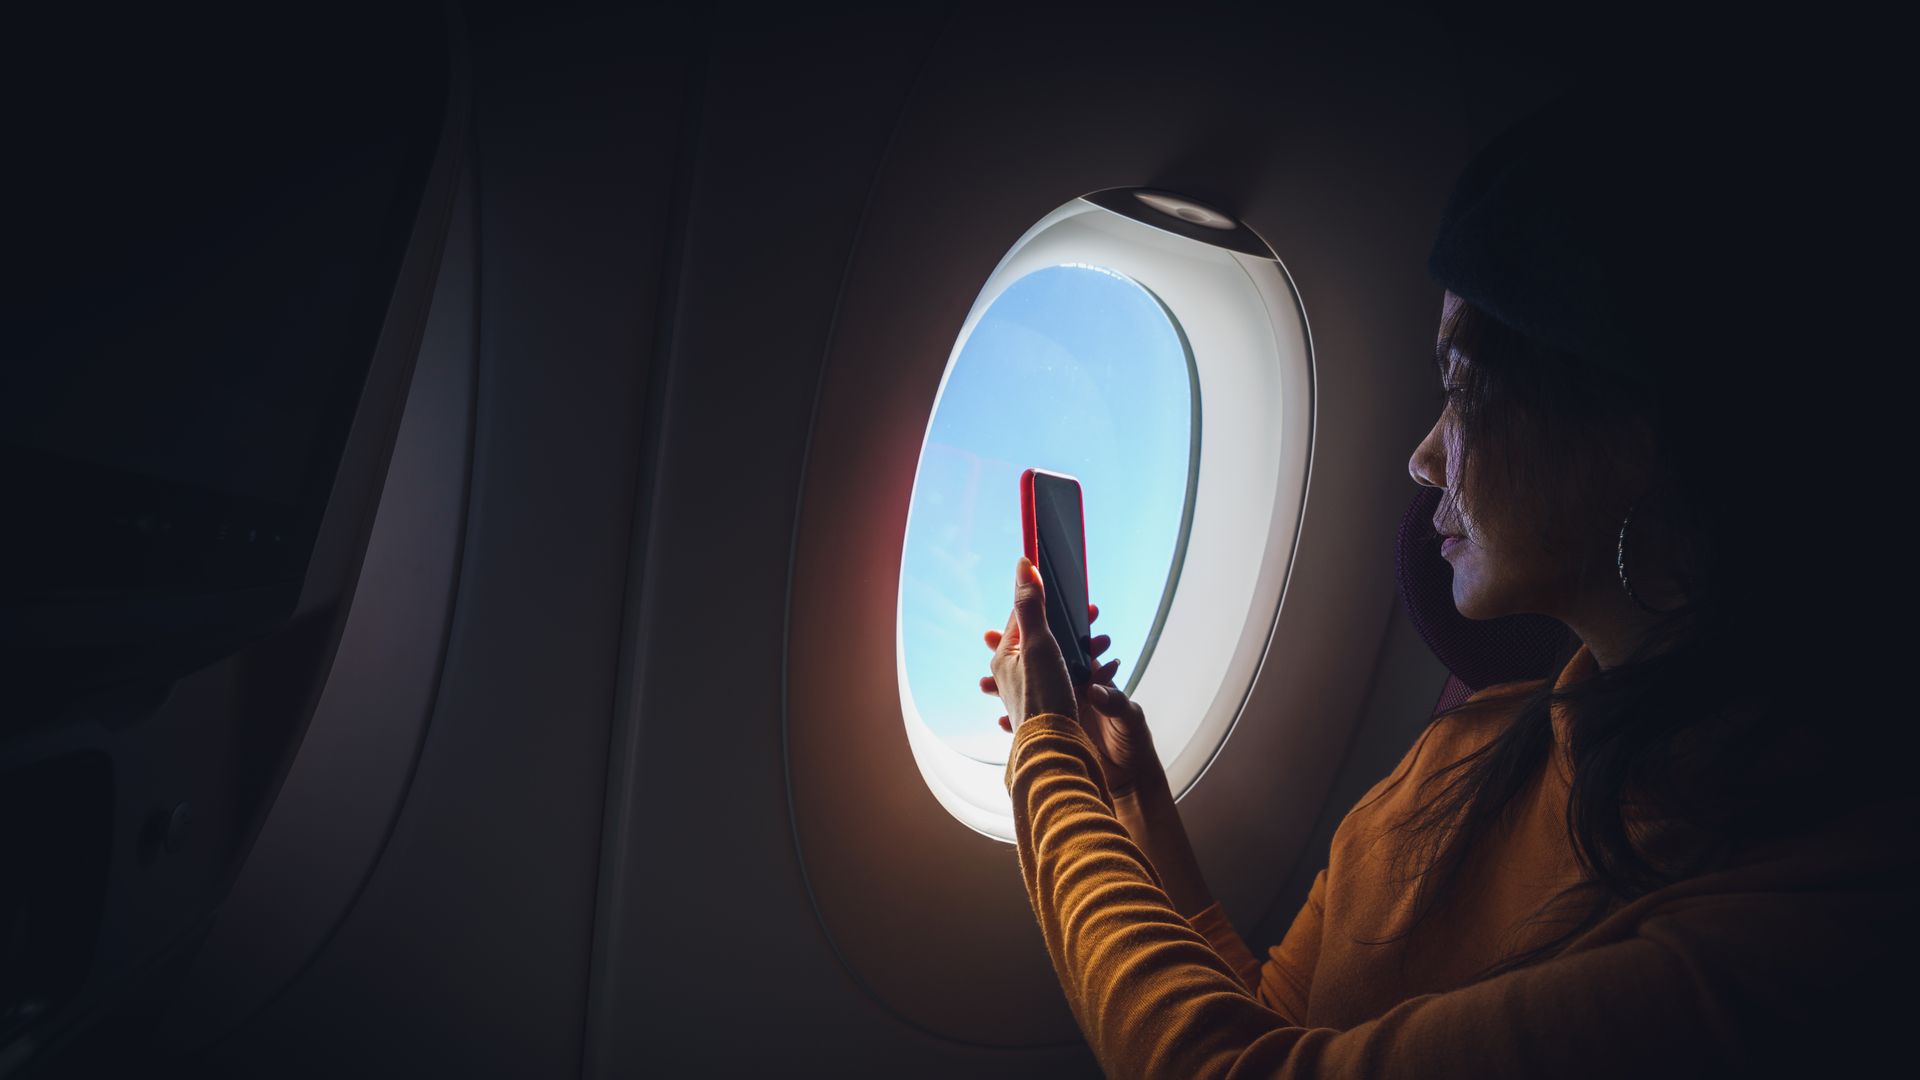 A passenger taking photos from their window seats.